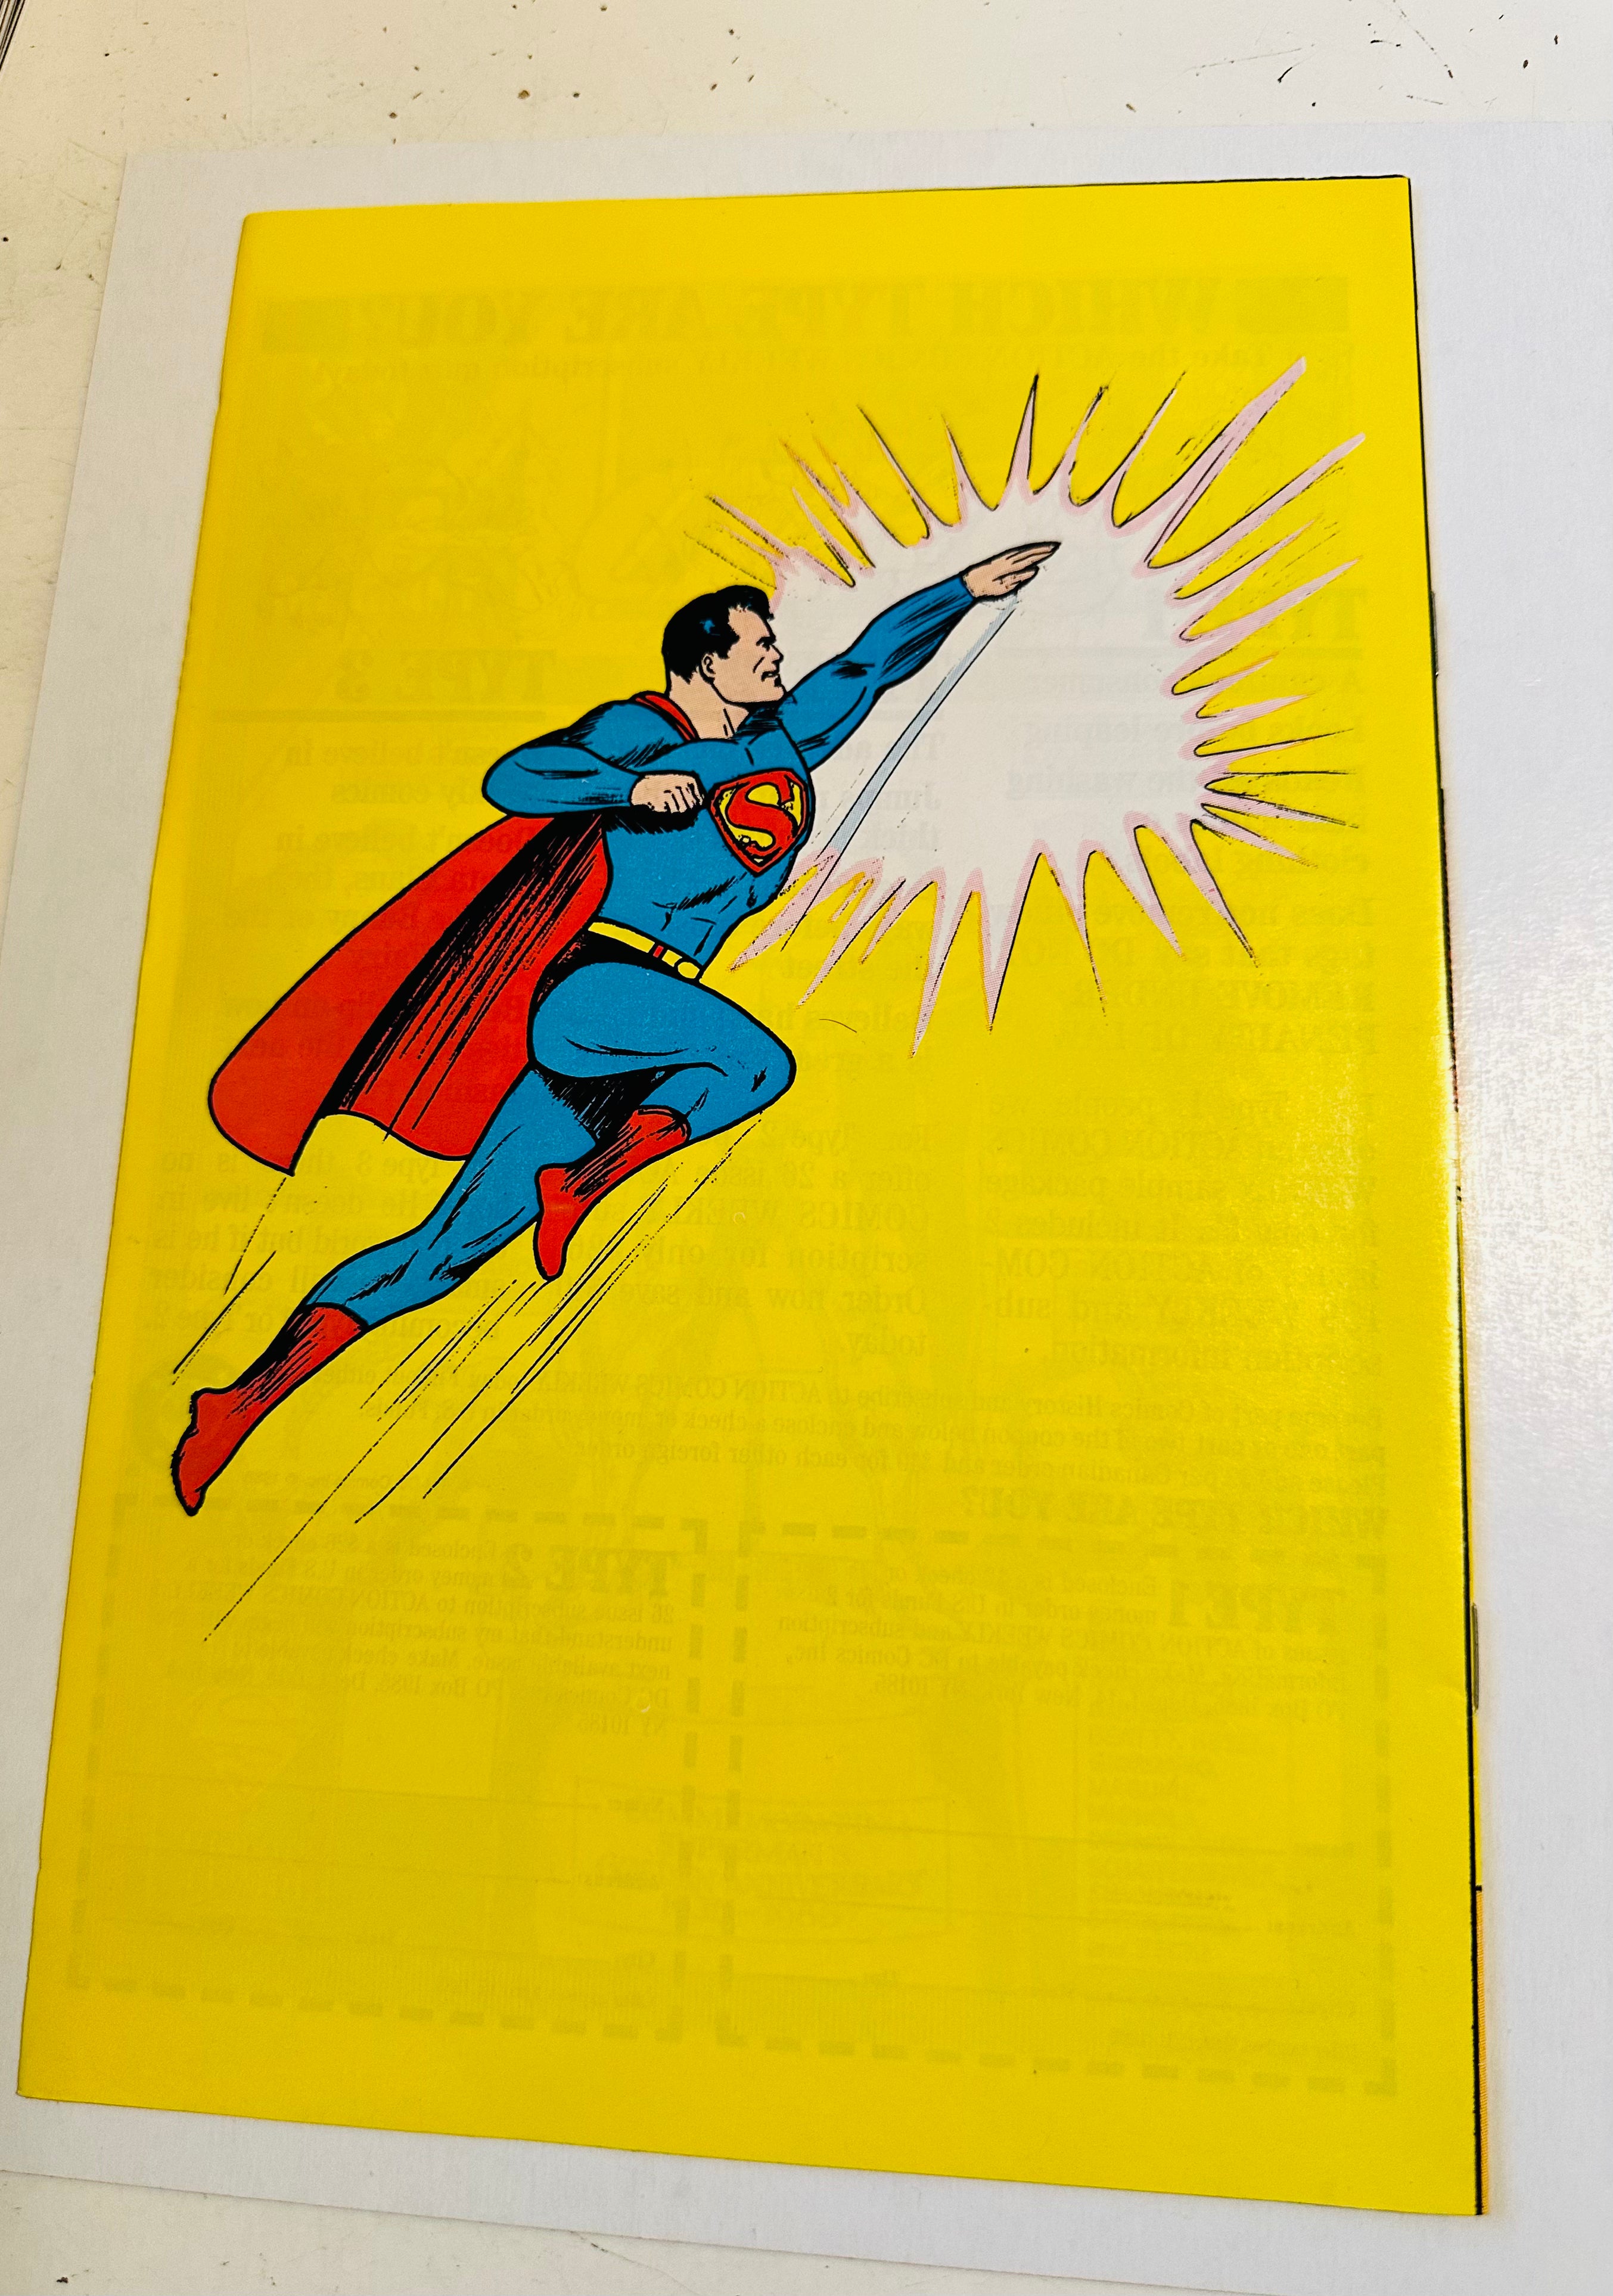 Action comics number one rare reprint issue 1988